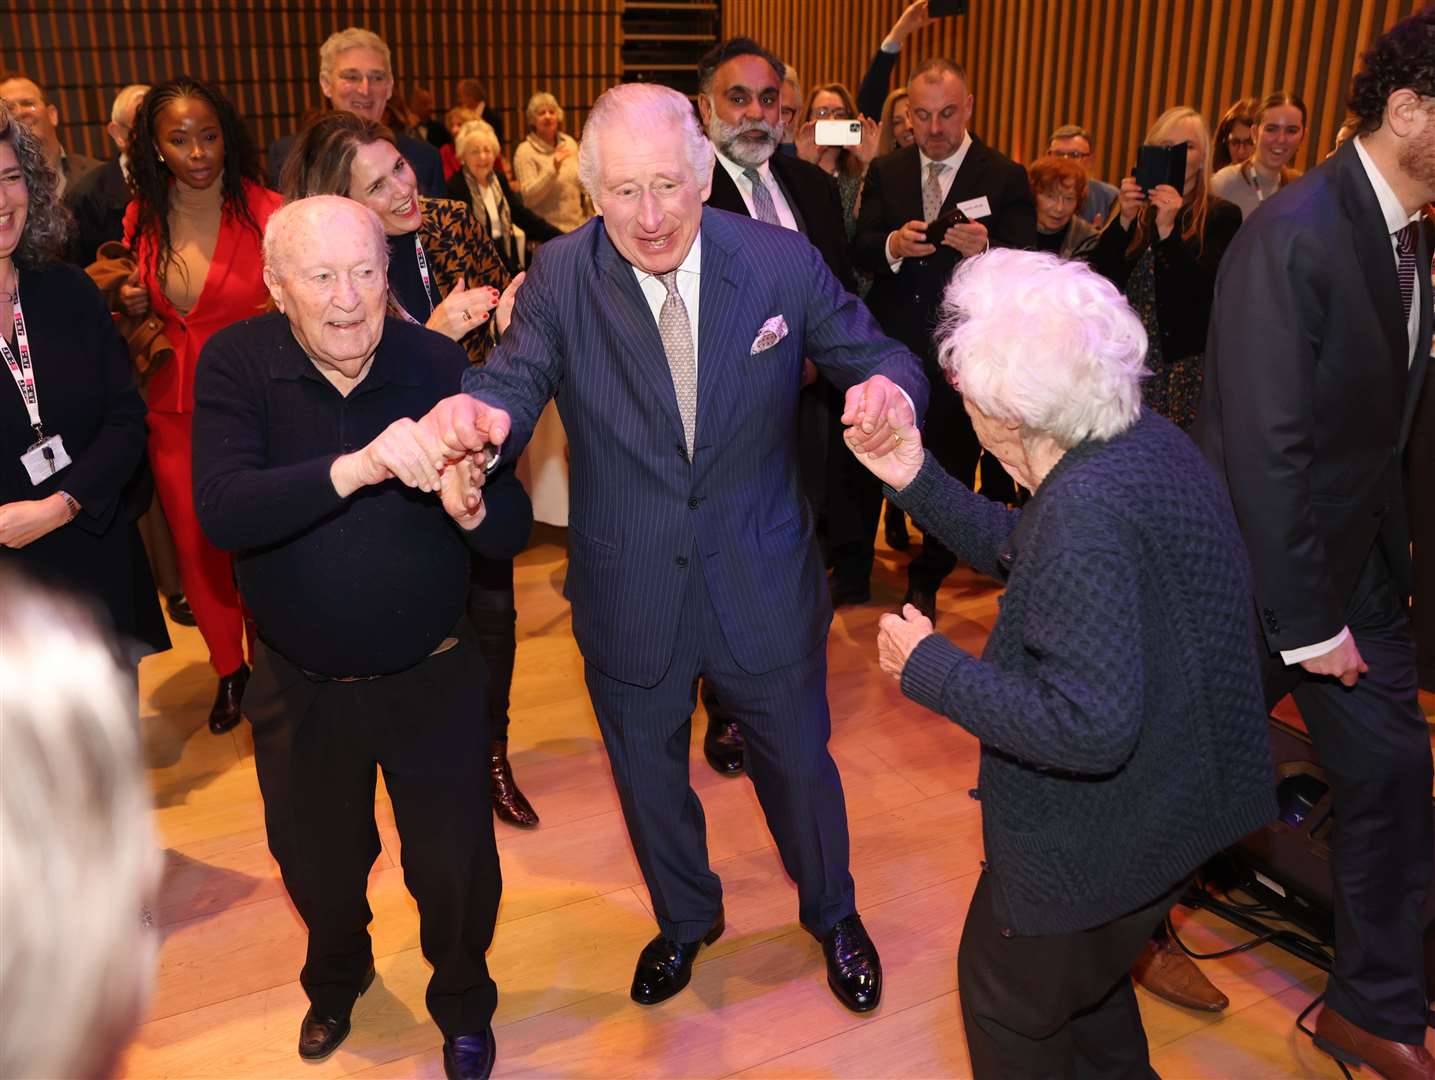 The King during a visit to the JW3 Jewish community centre in London ahead of Chanukah celebrations in December 2022 (Ian Vogler/Daily Mirror/PA)